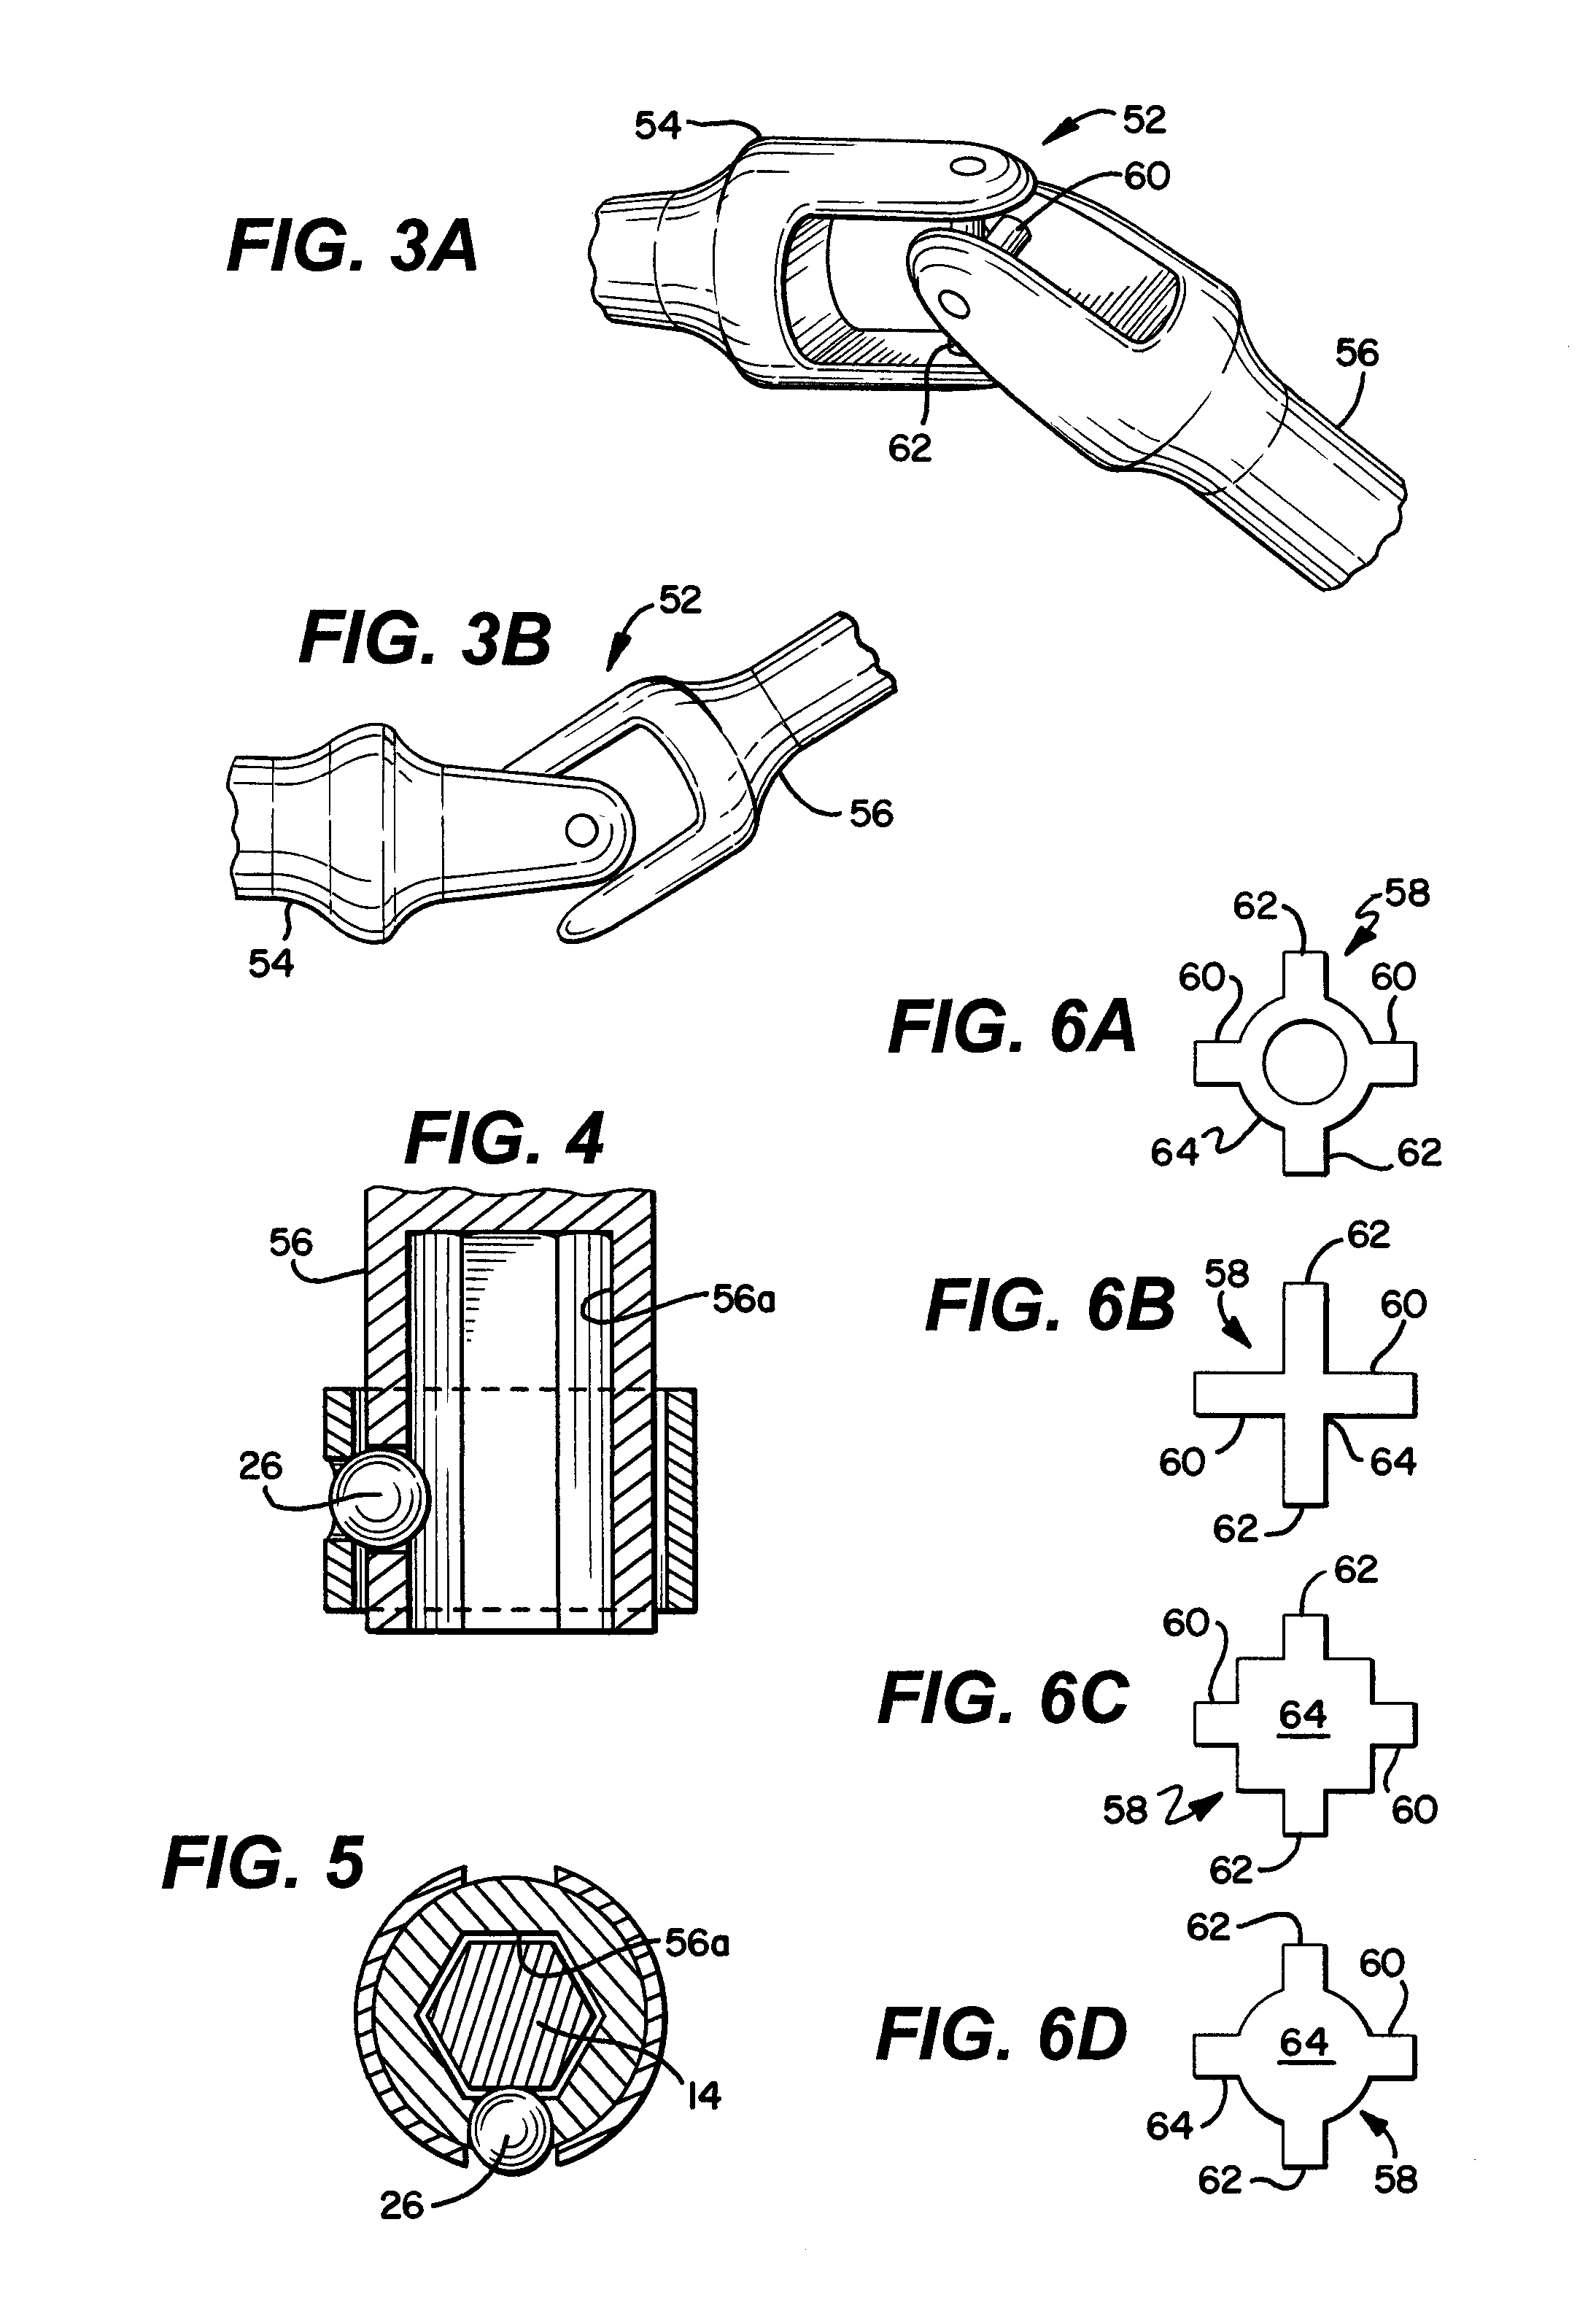 Extension Shaft for Holding a Tool for Rotary Driven Motion